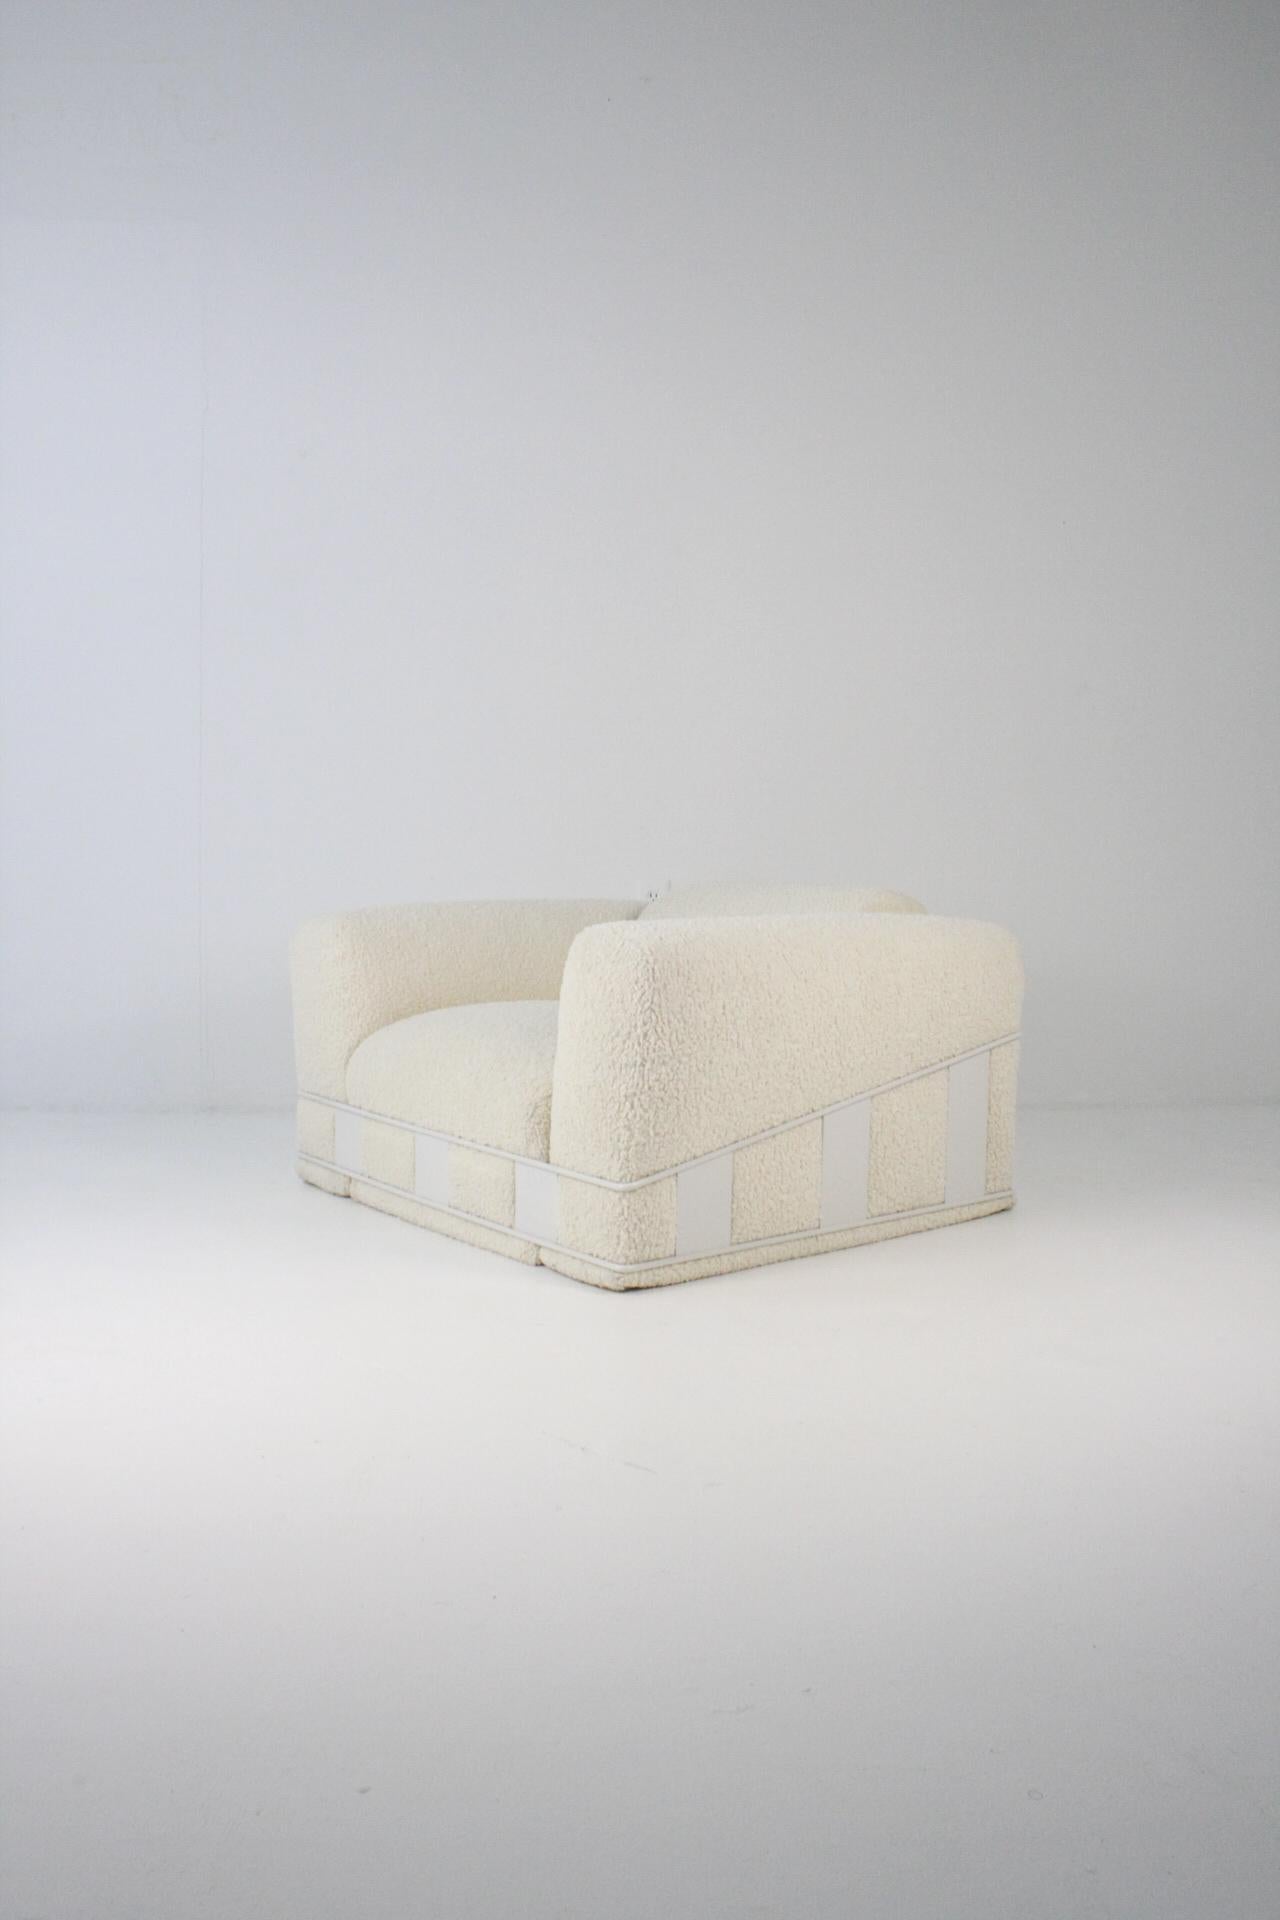 Great Craft and Associates caged lounge chair designed by Adrian Pearsall. Chair is early 1970s. This chair has custom bouclé and Custom off white powder coated frame. One of a kind statement piece.
Versatile chair that works well with any style of